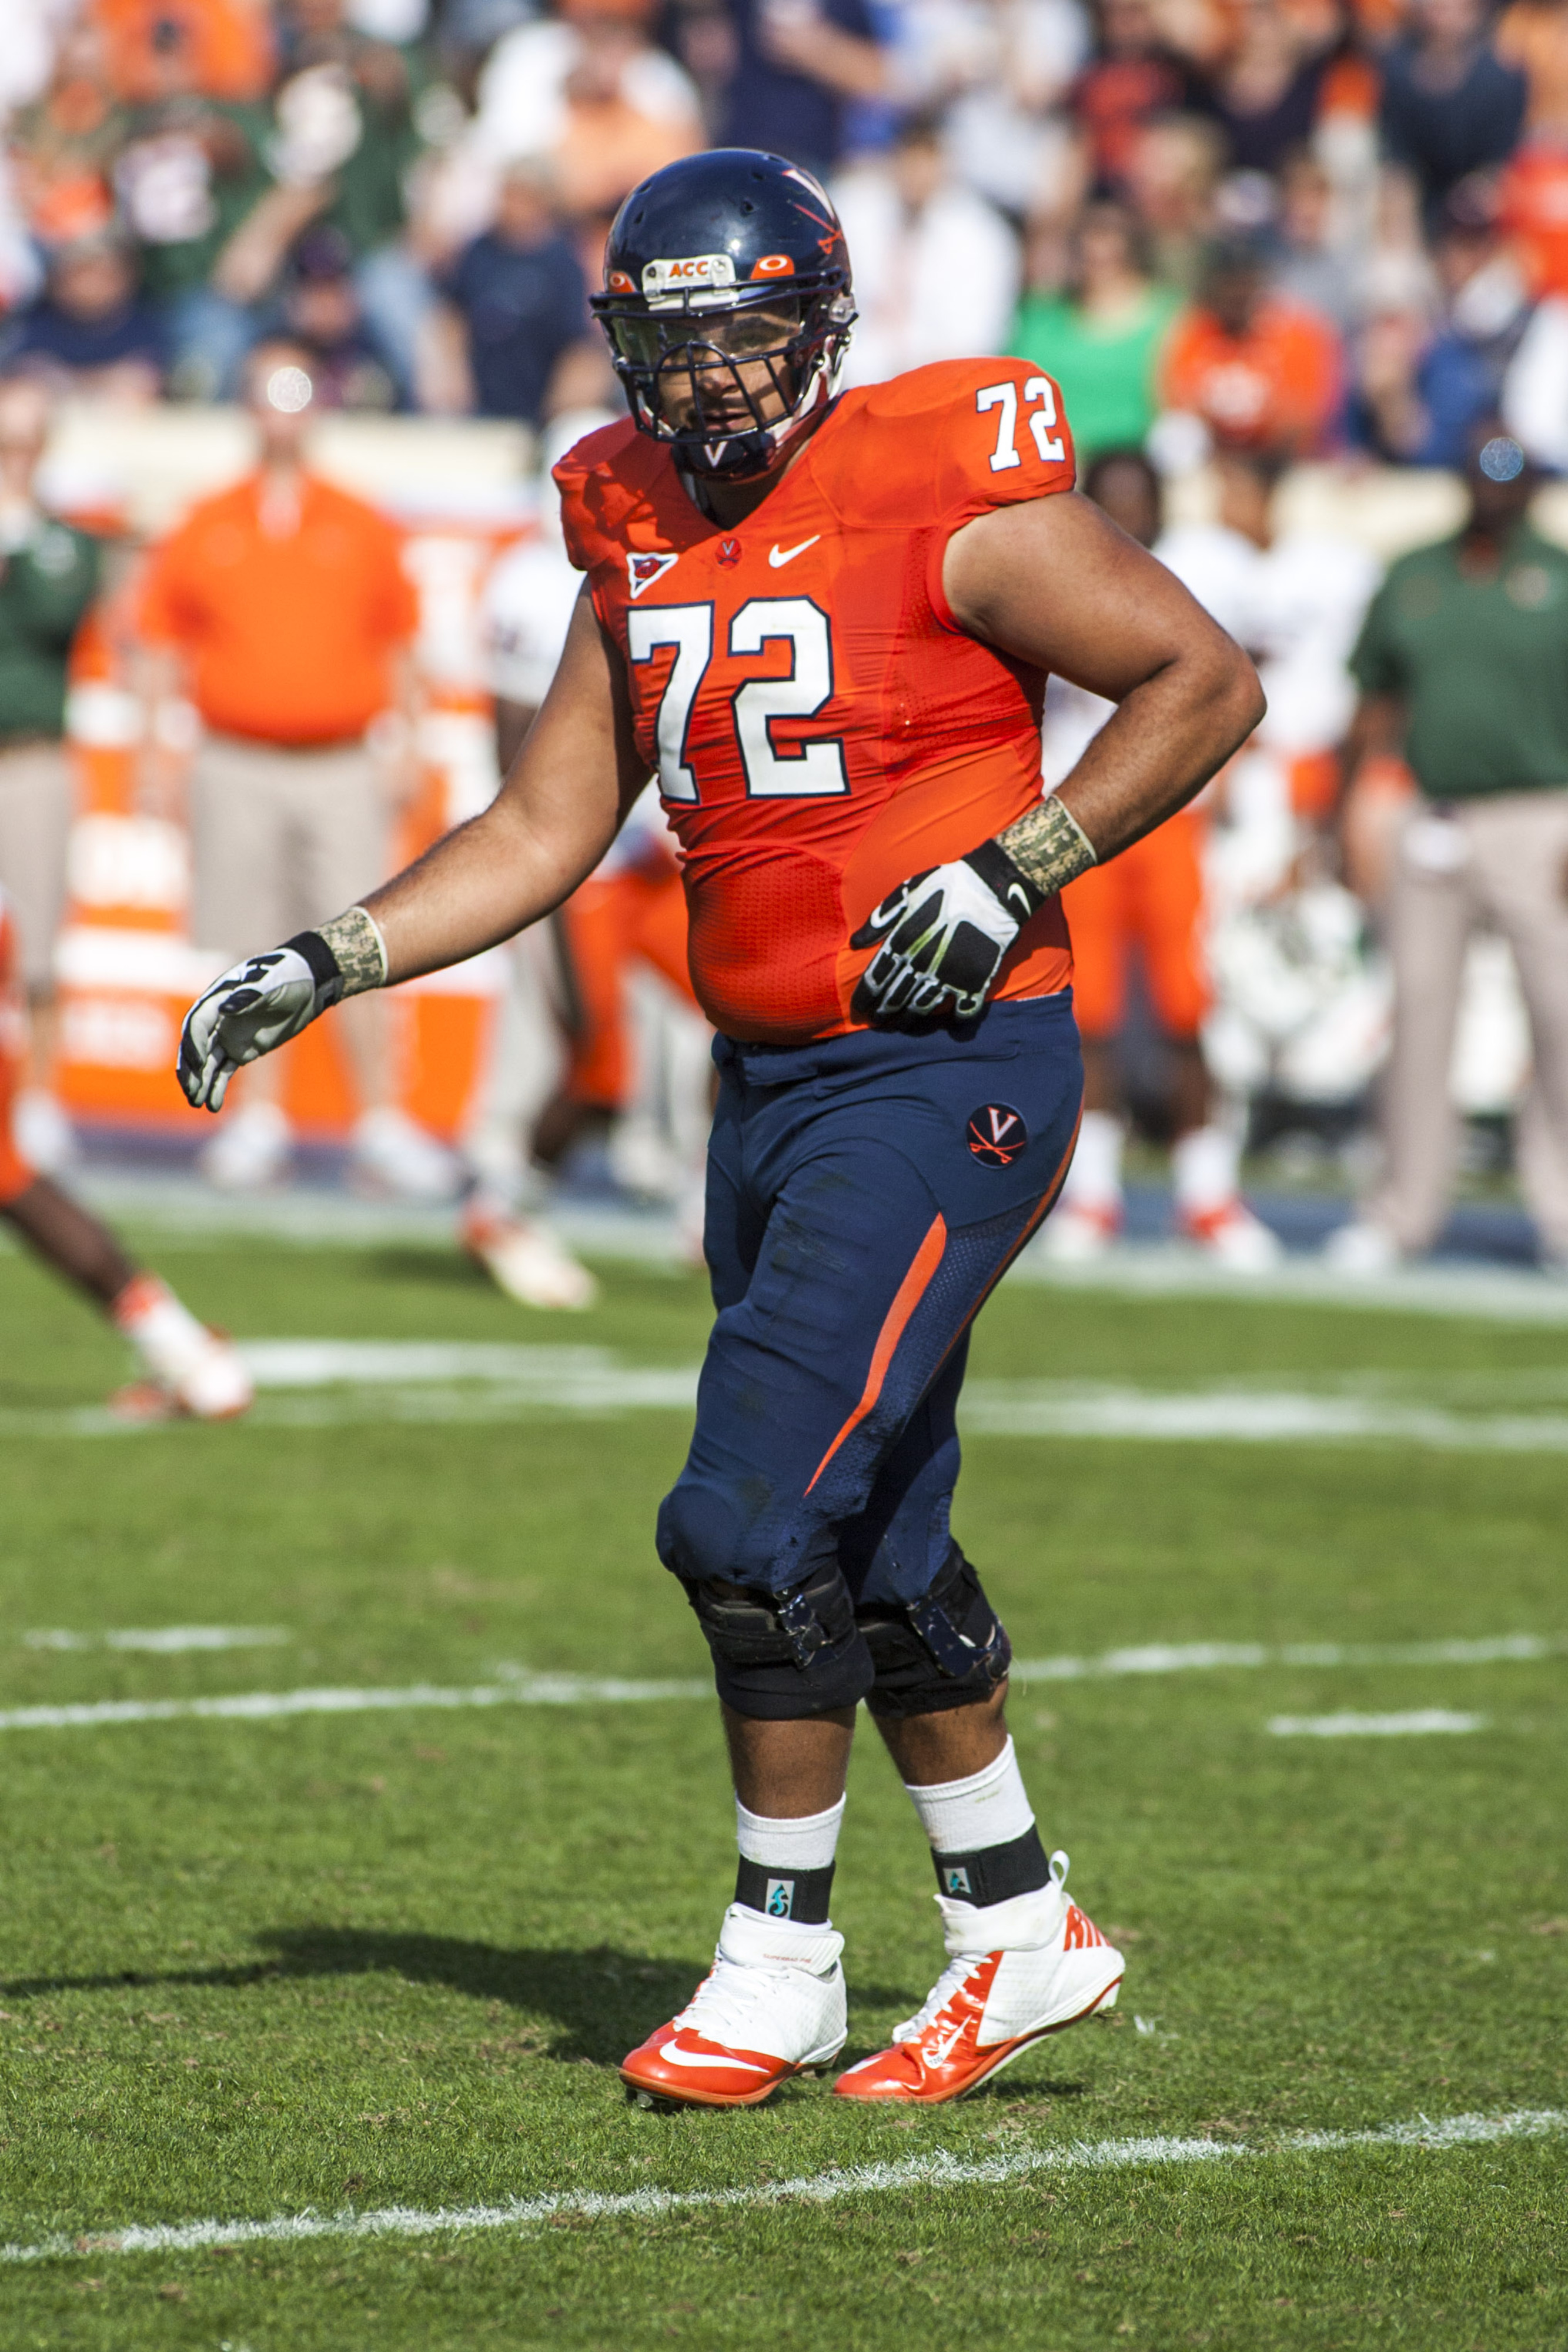 Former UVA star Oday Aboushi will take his talents to the Big Apple with the New York Jets